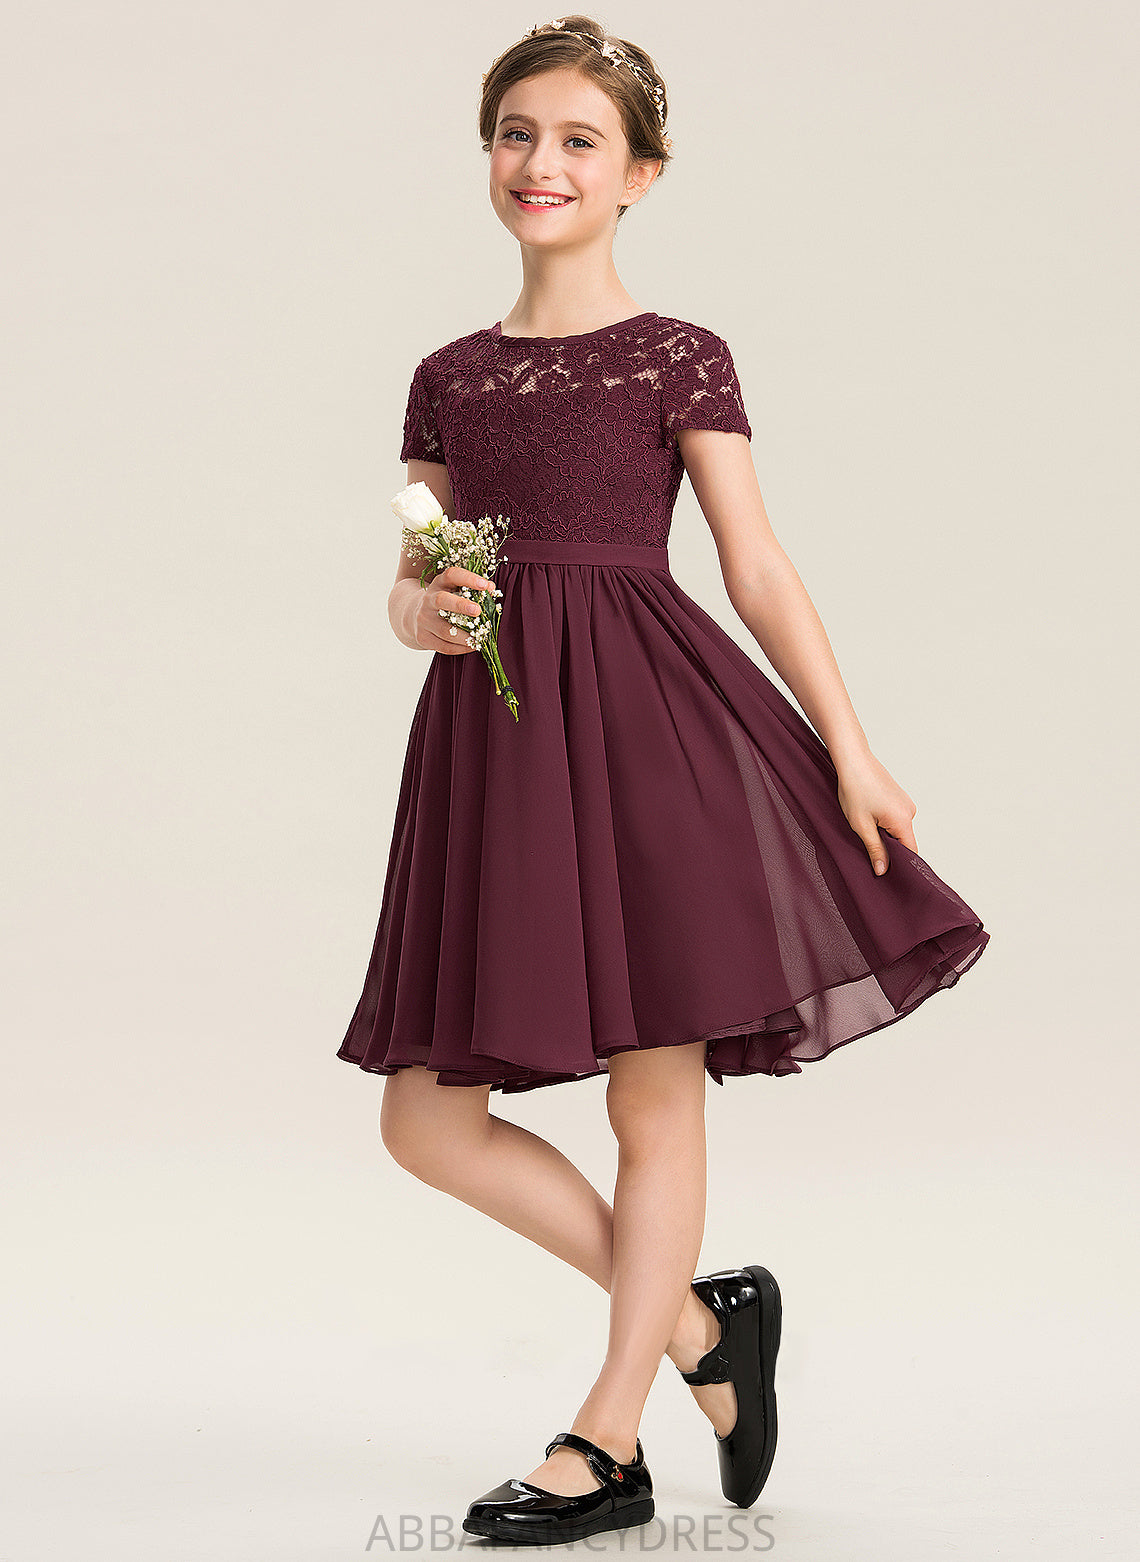 With Junior Bridesmaid Dresses Neck Chiffon Scoop Lace A-Line Knee-Length Bow(s) Nola